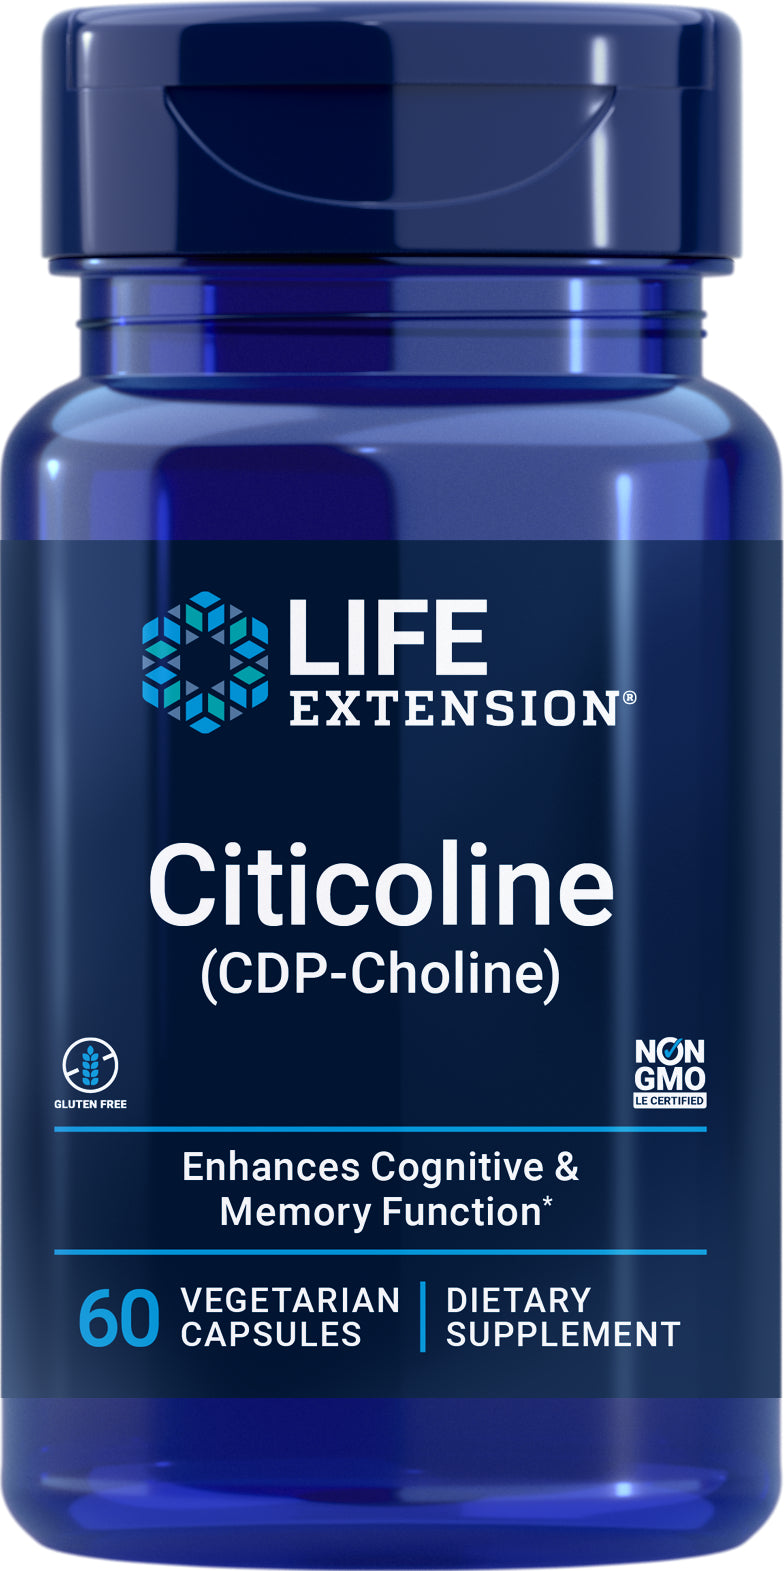 Citicoline (CDP-Choline) 60 veg caps by Life Extension